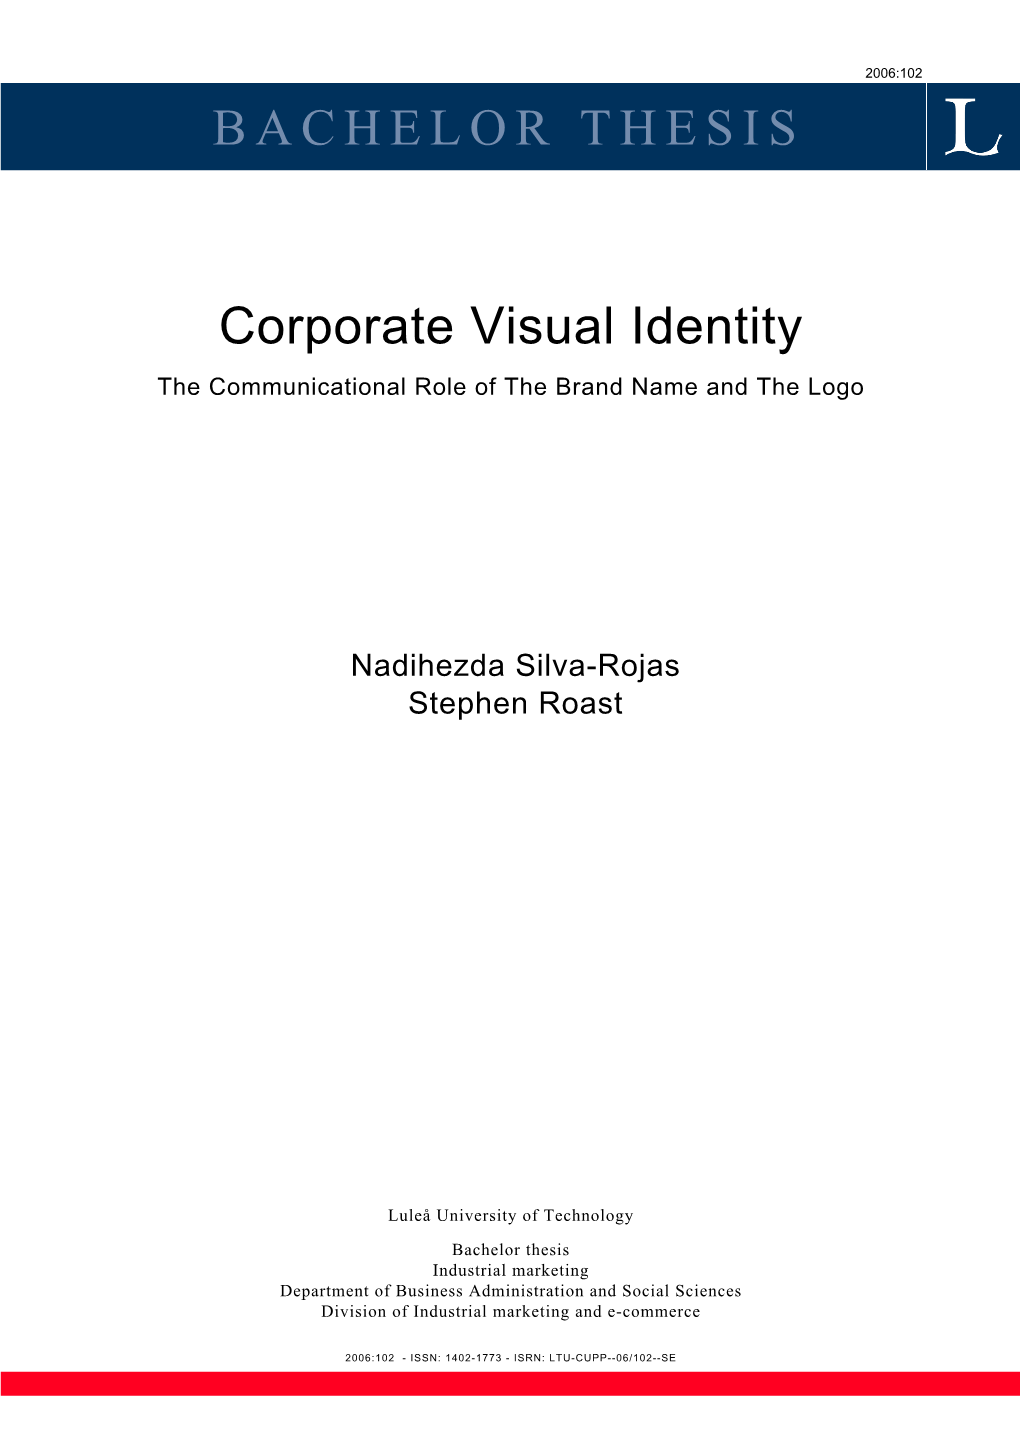 Corporate Visual Identity the Communicational Role of the Brand Name and the Logo